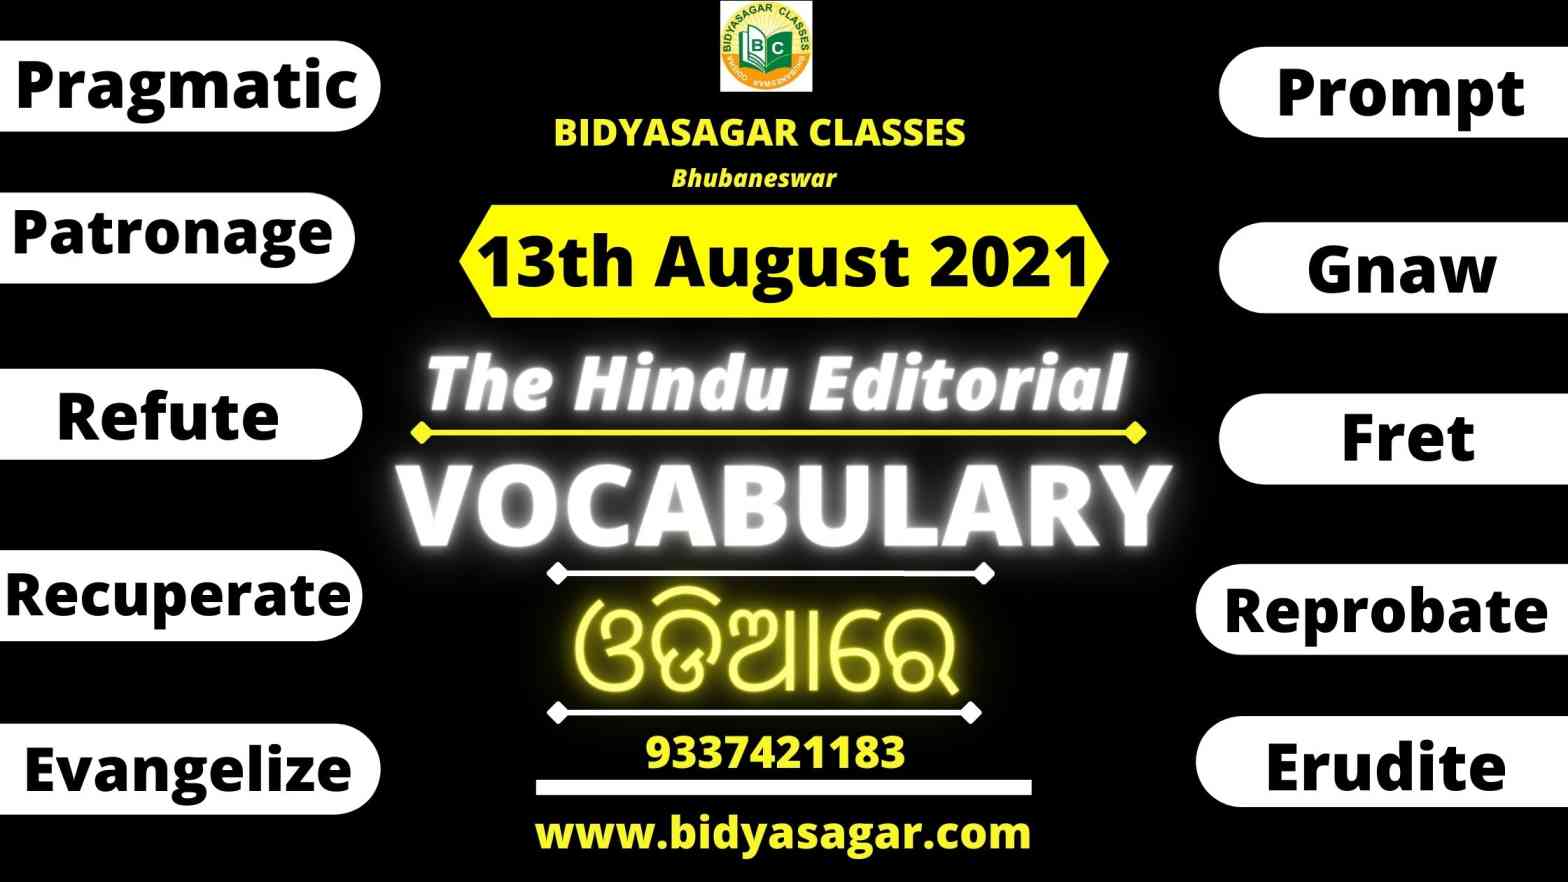 The Hindu Editorial Vocabulary of 13th August 2021